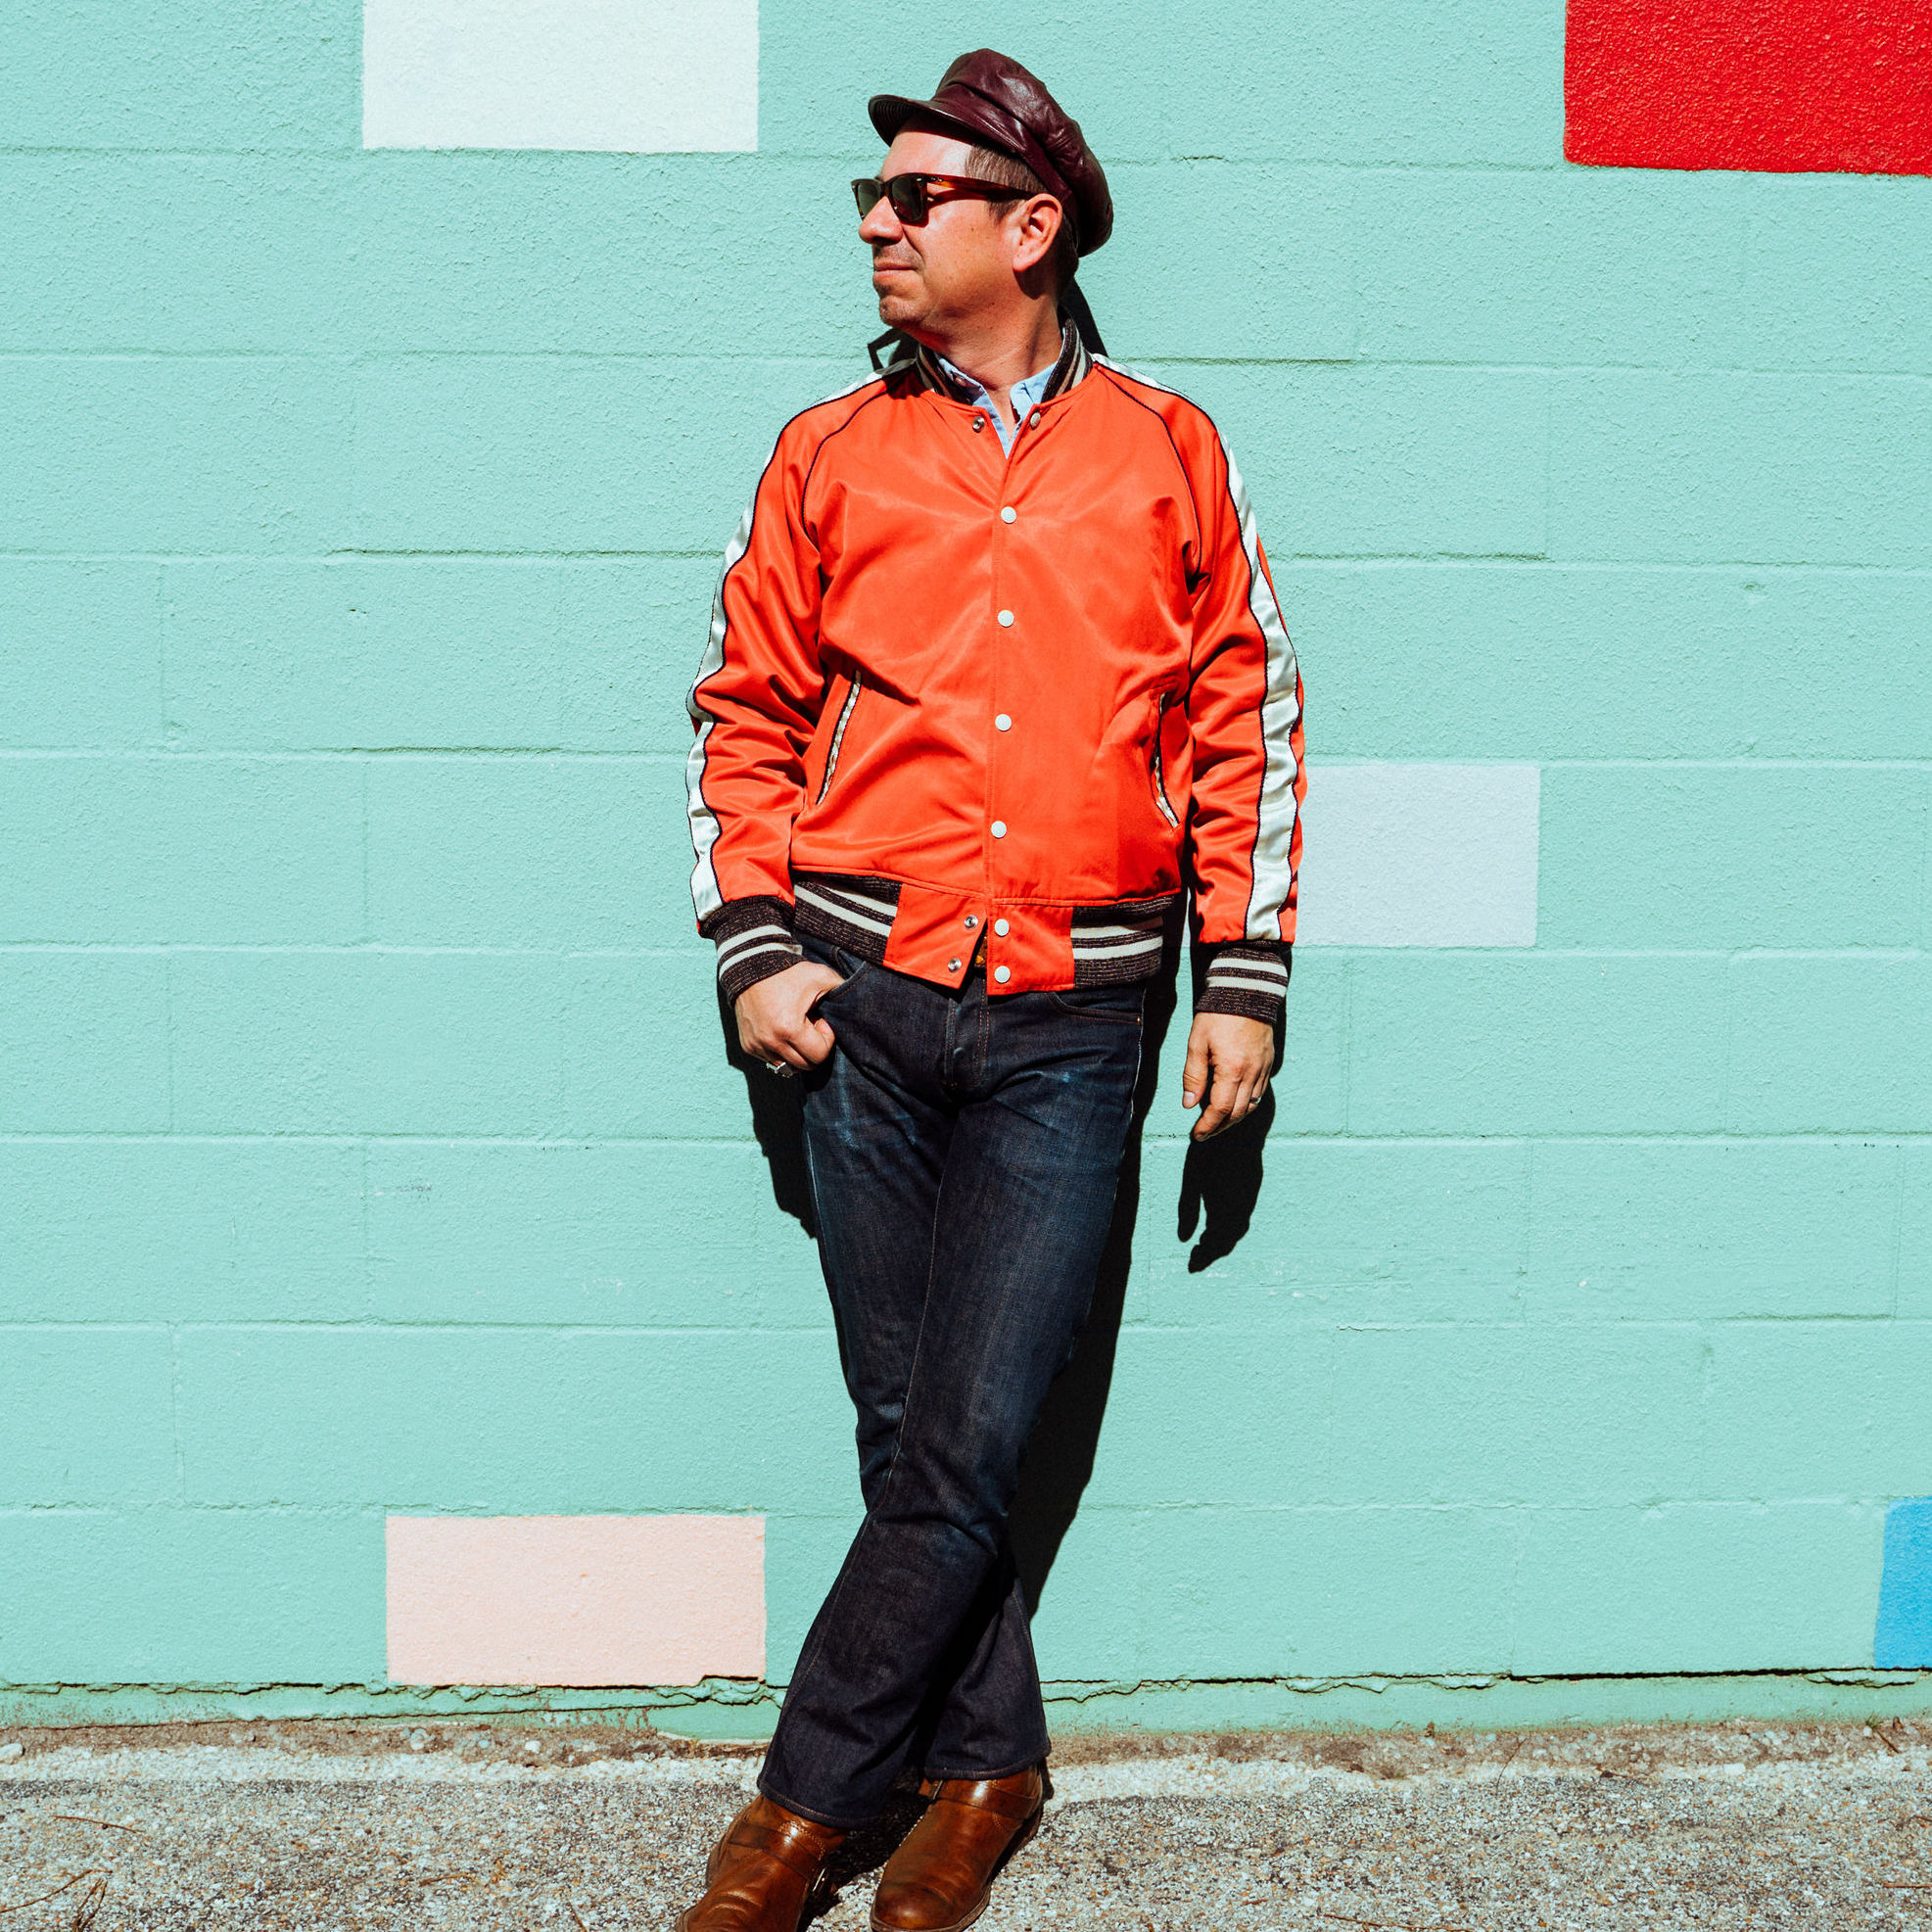 A man wearing dark trousers, an orange jacket, sunglasses and a hat, leaning against a light blue wall